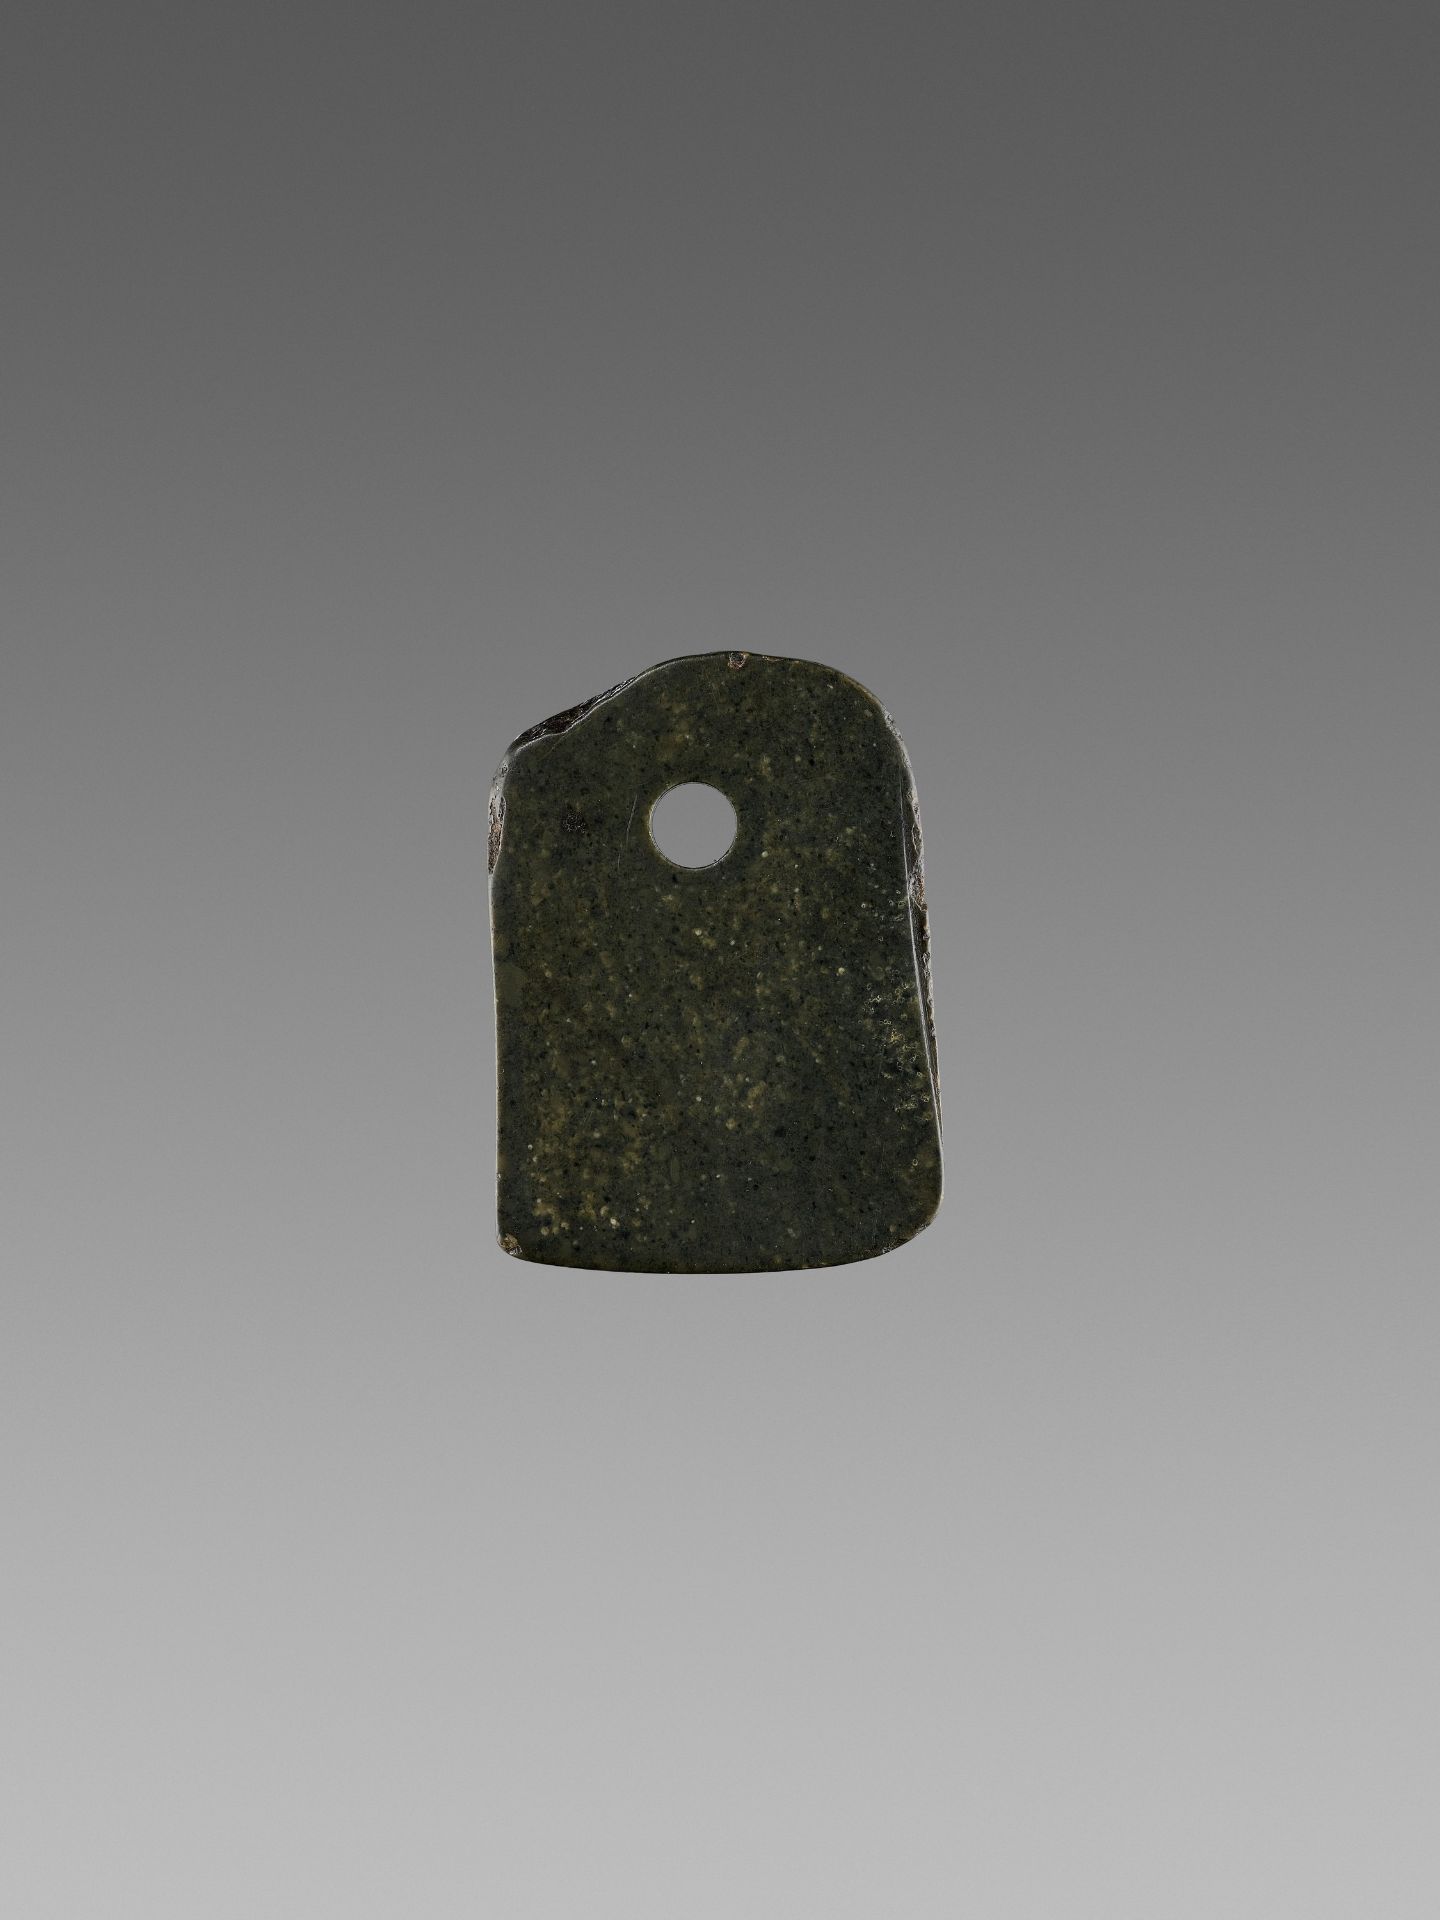 A BLACK JADE AXE, 2ND MILLENNIUM BC - Image 2 of 7